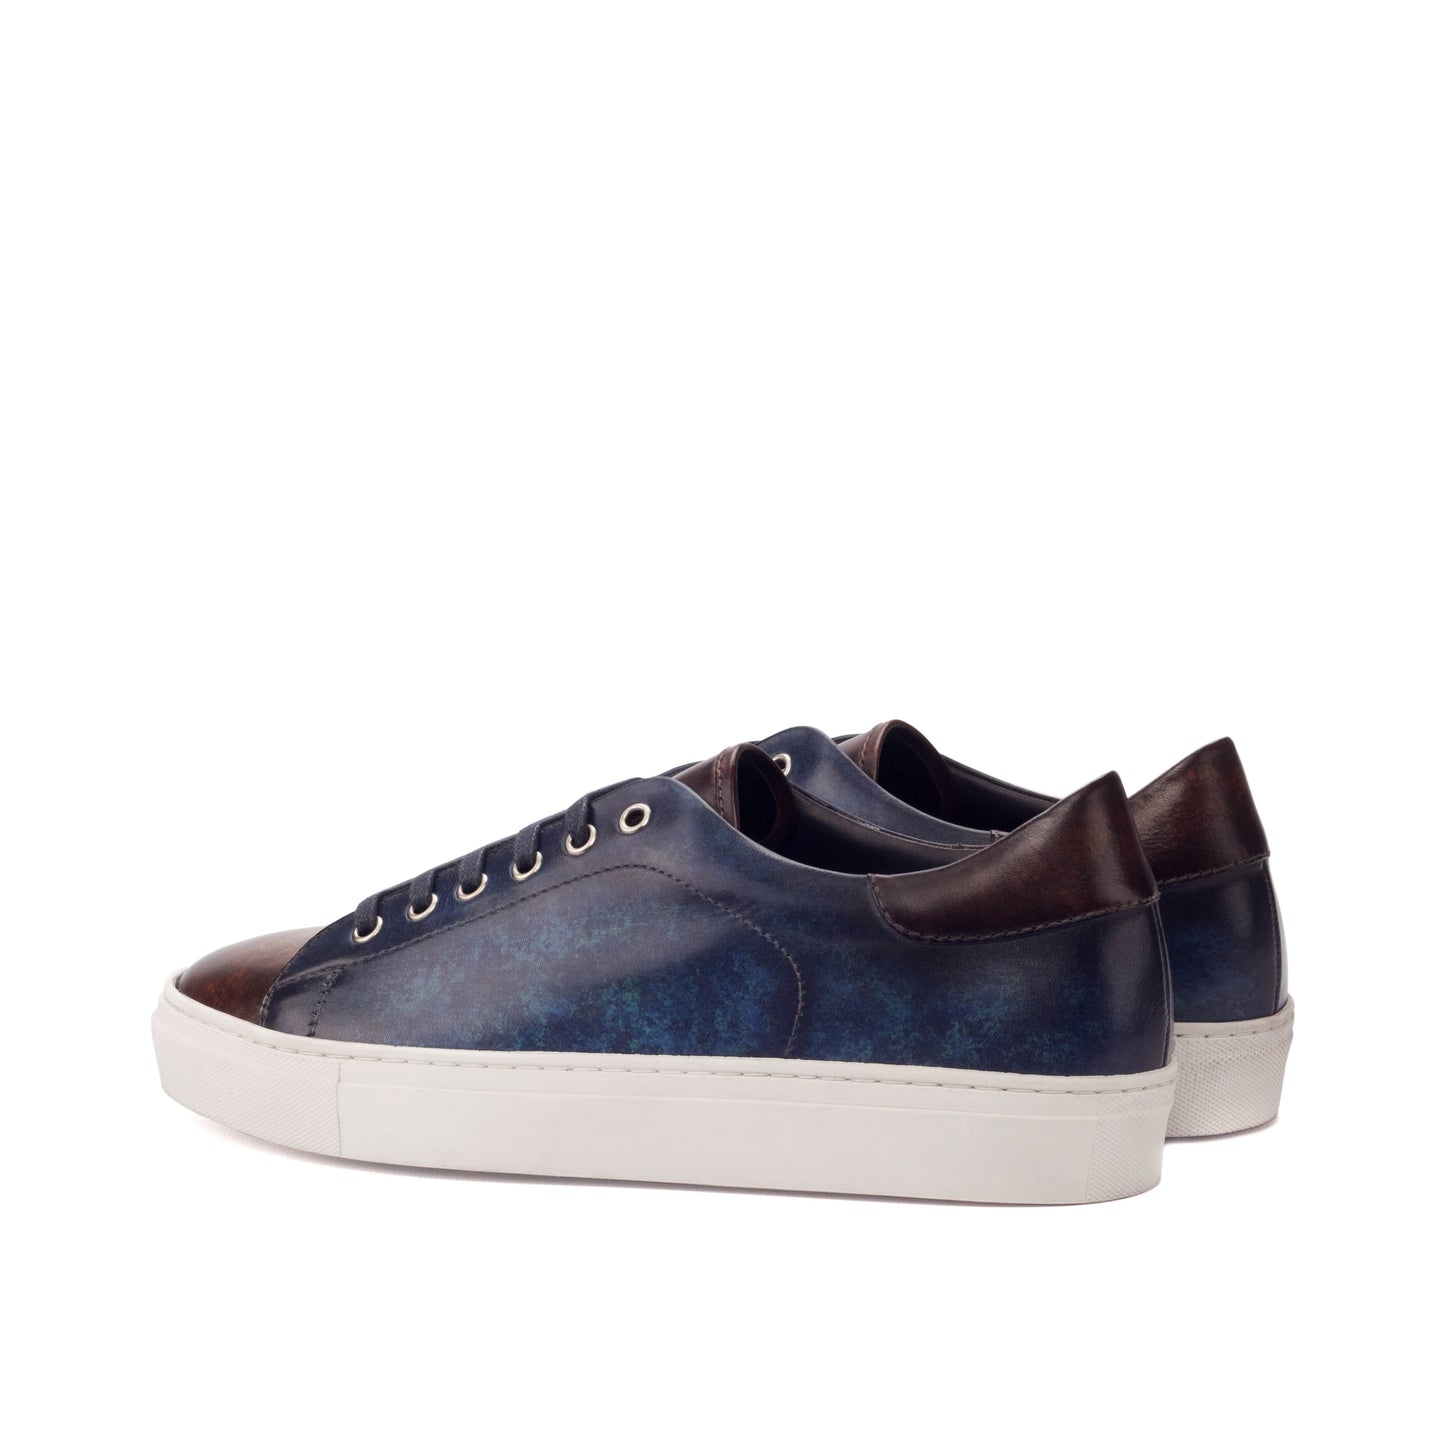 Sneakers blue jeans marble patina &  brown leather